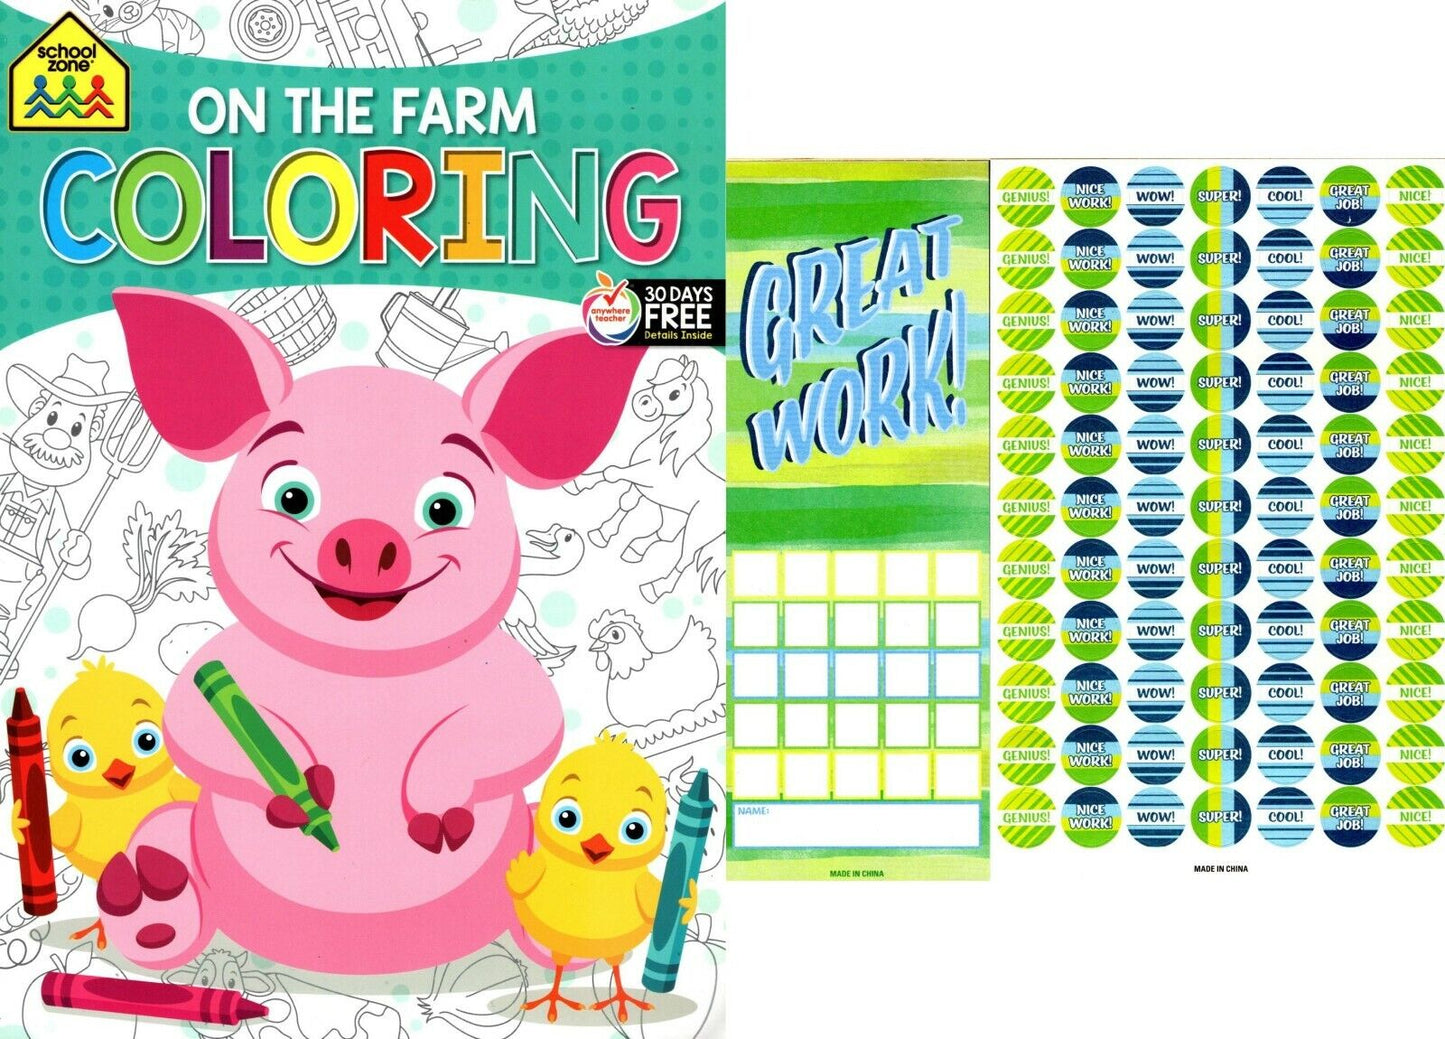 On the Farm - Coloring Book + Award Stickers and Charts